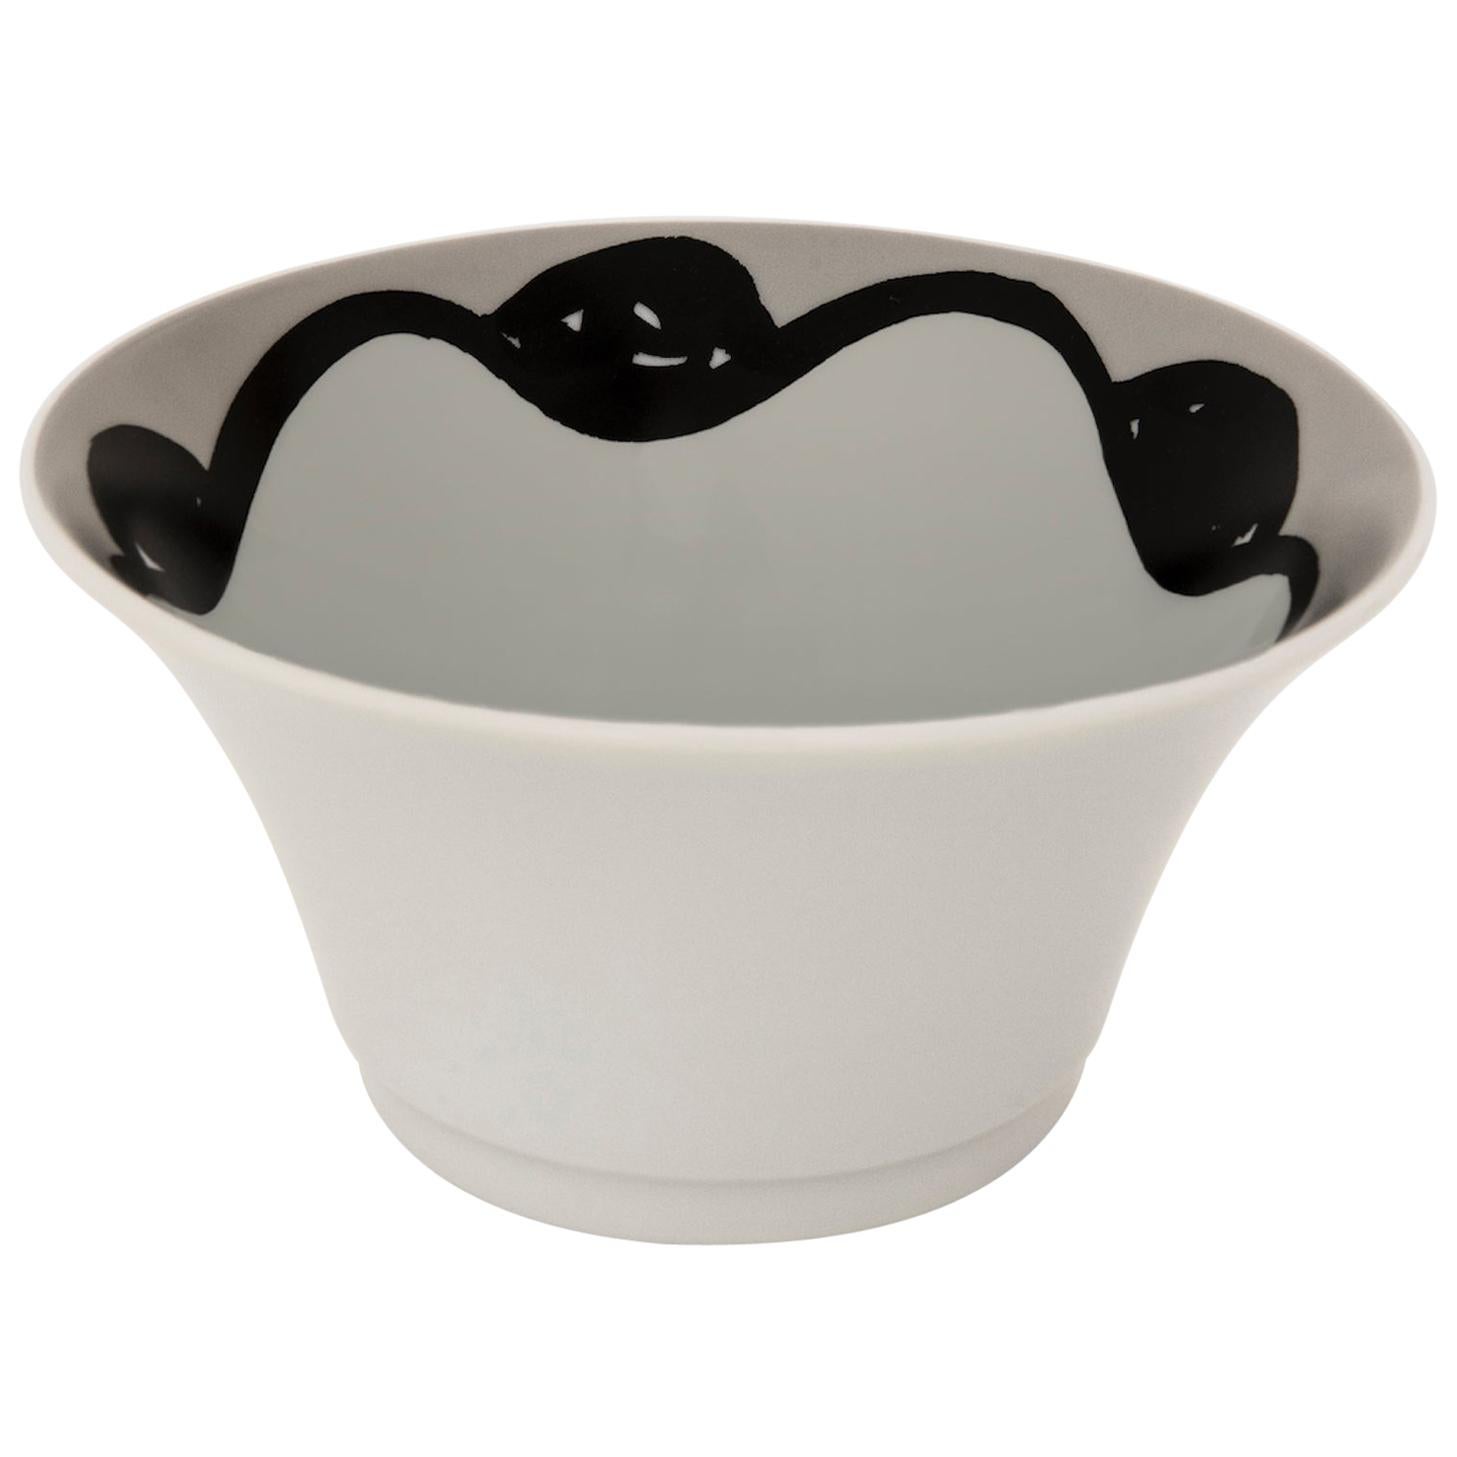 Black White Gray French Limoges Porcelain Deep Bowl, Exclusive Edition For Sale